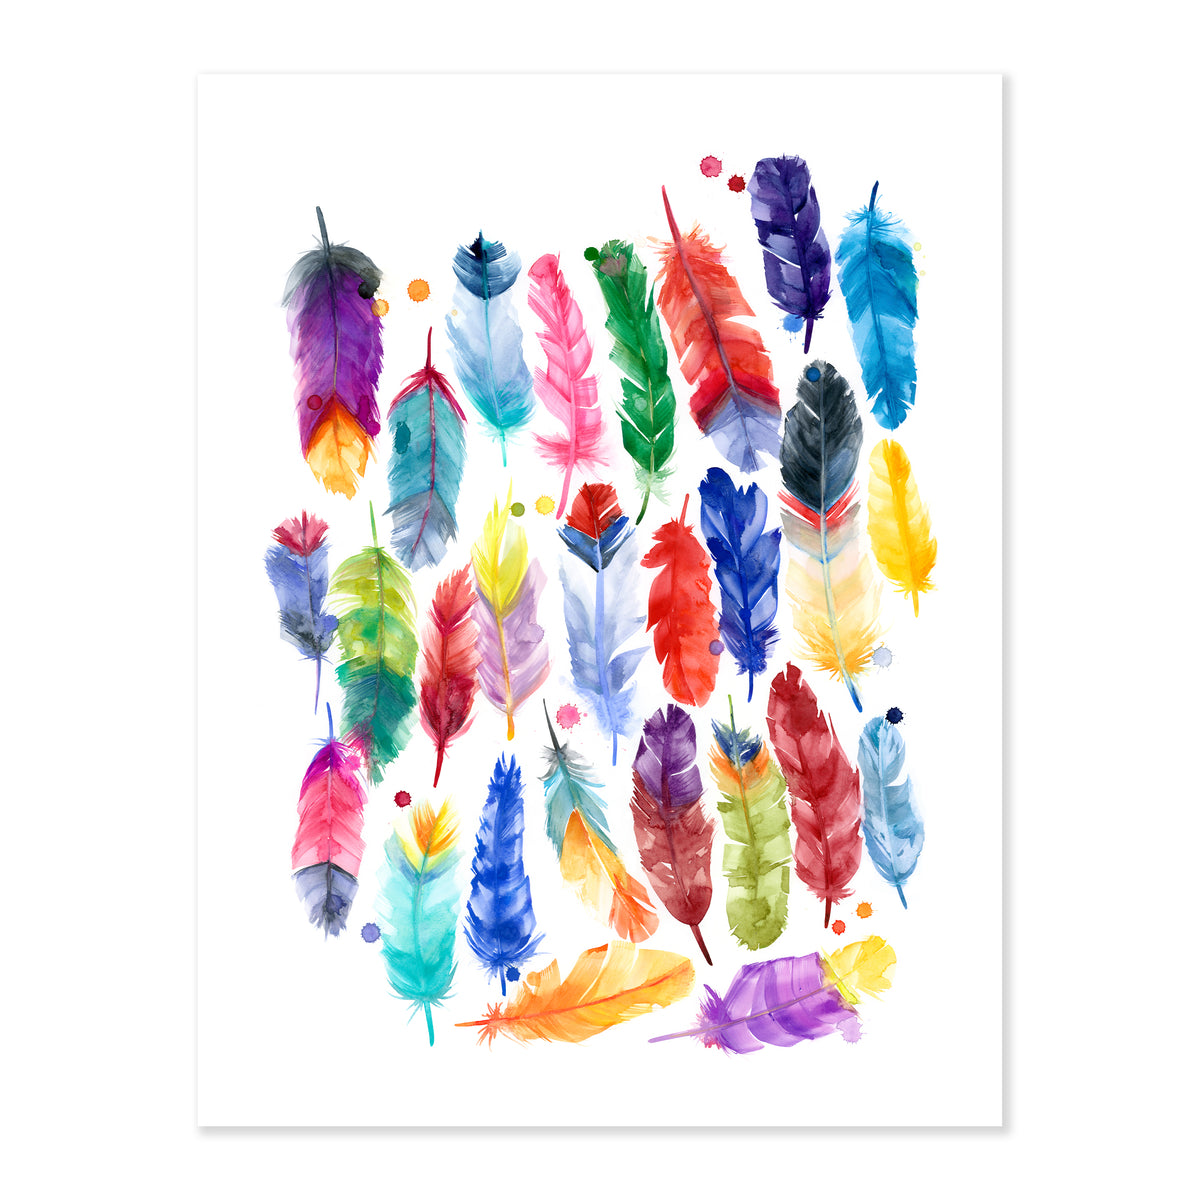 A fine art print illustrating an assortment of feathers of different shapes and colors laid out horizontally and vertically featuring blues purples oranges reds yellows pinks and greens painted with watercolors on a soft white background